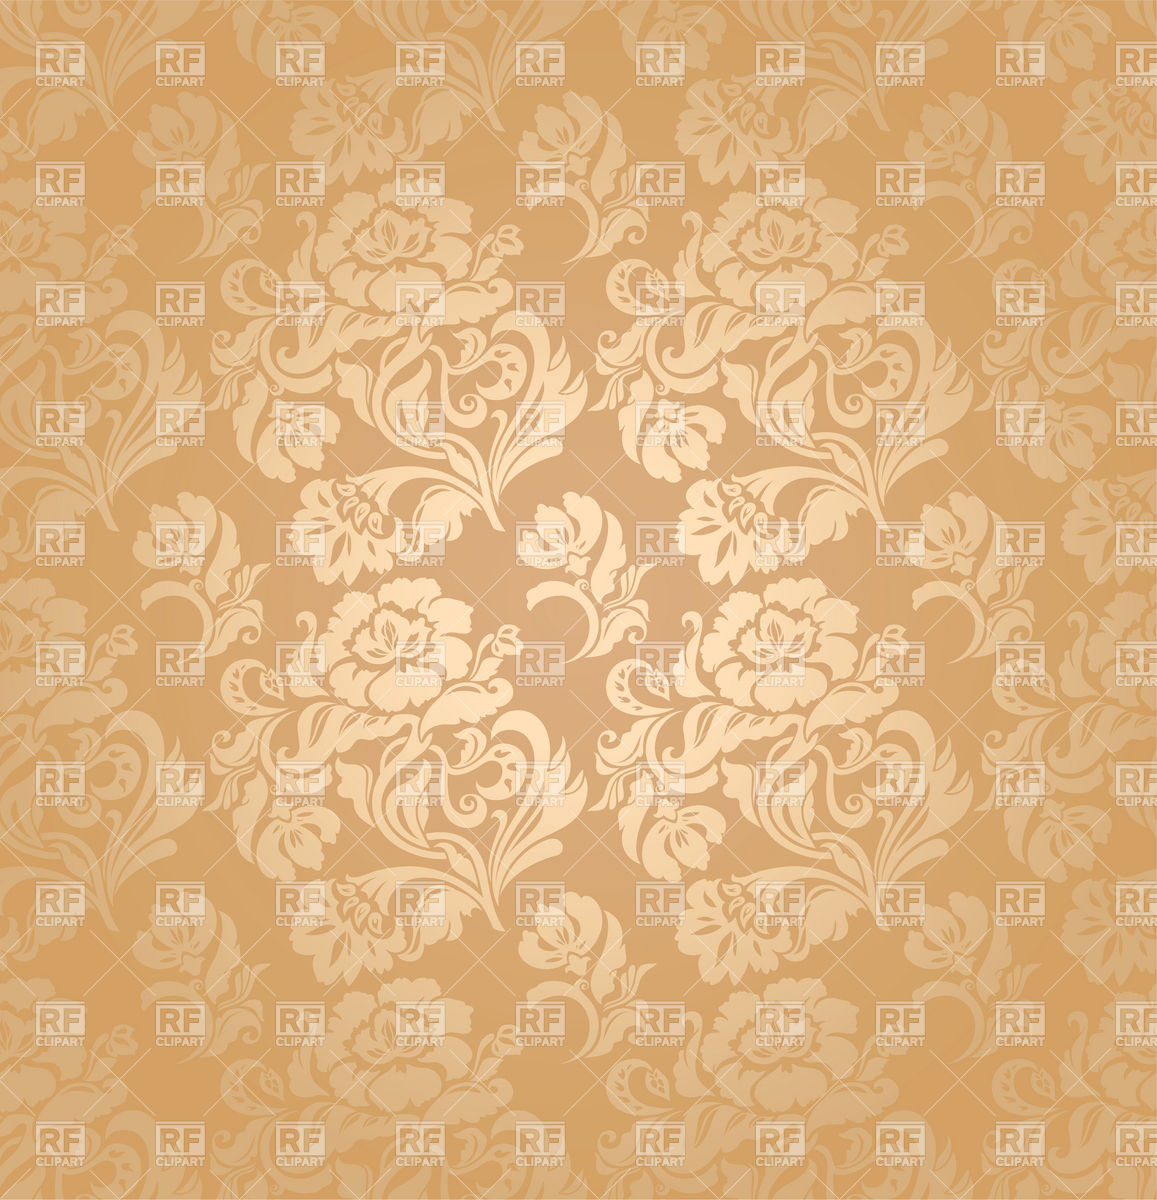 Beige victorian wallpaper with floral pattern download royalty free